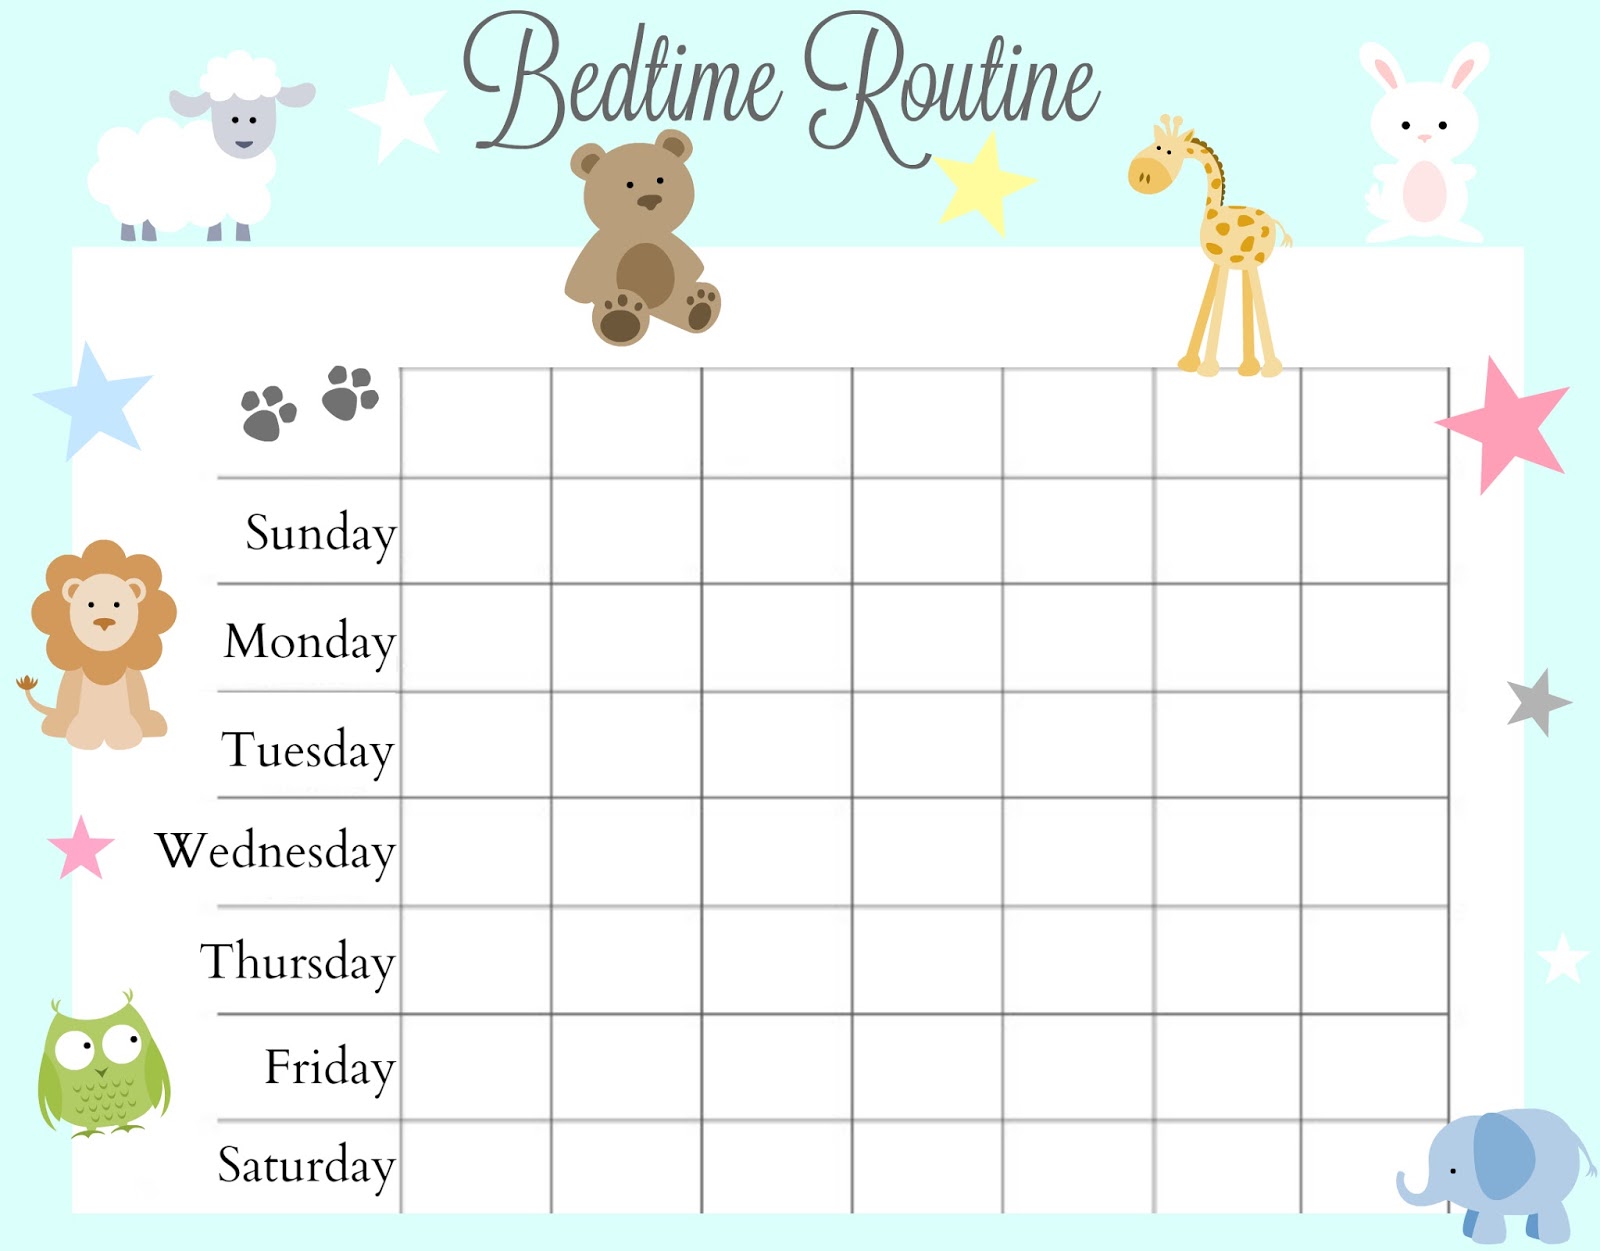 guide-for-effective-bedtime-routine-using-elo-pillow-free-bedtime-routine-chart-plus-a